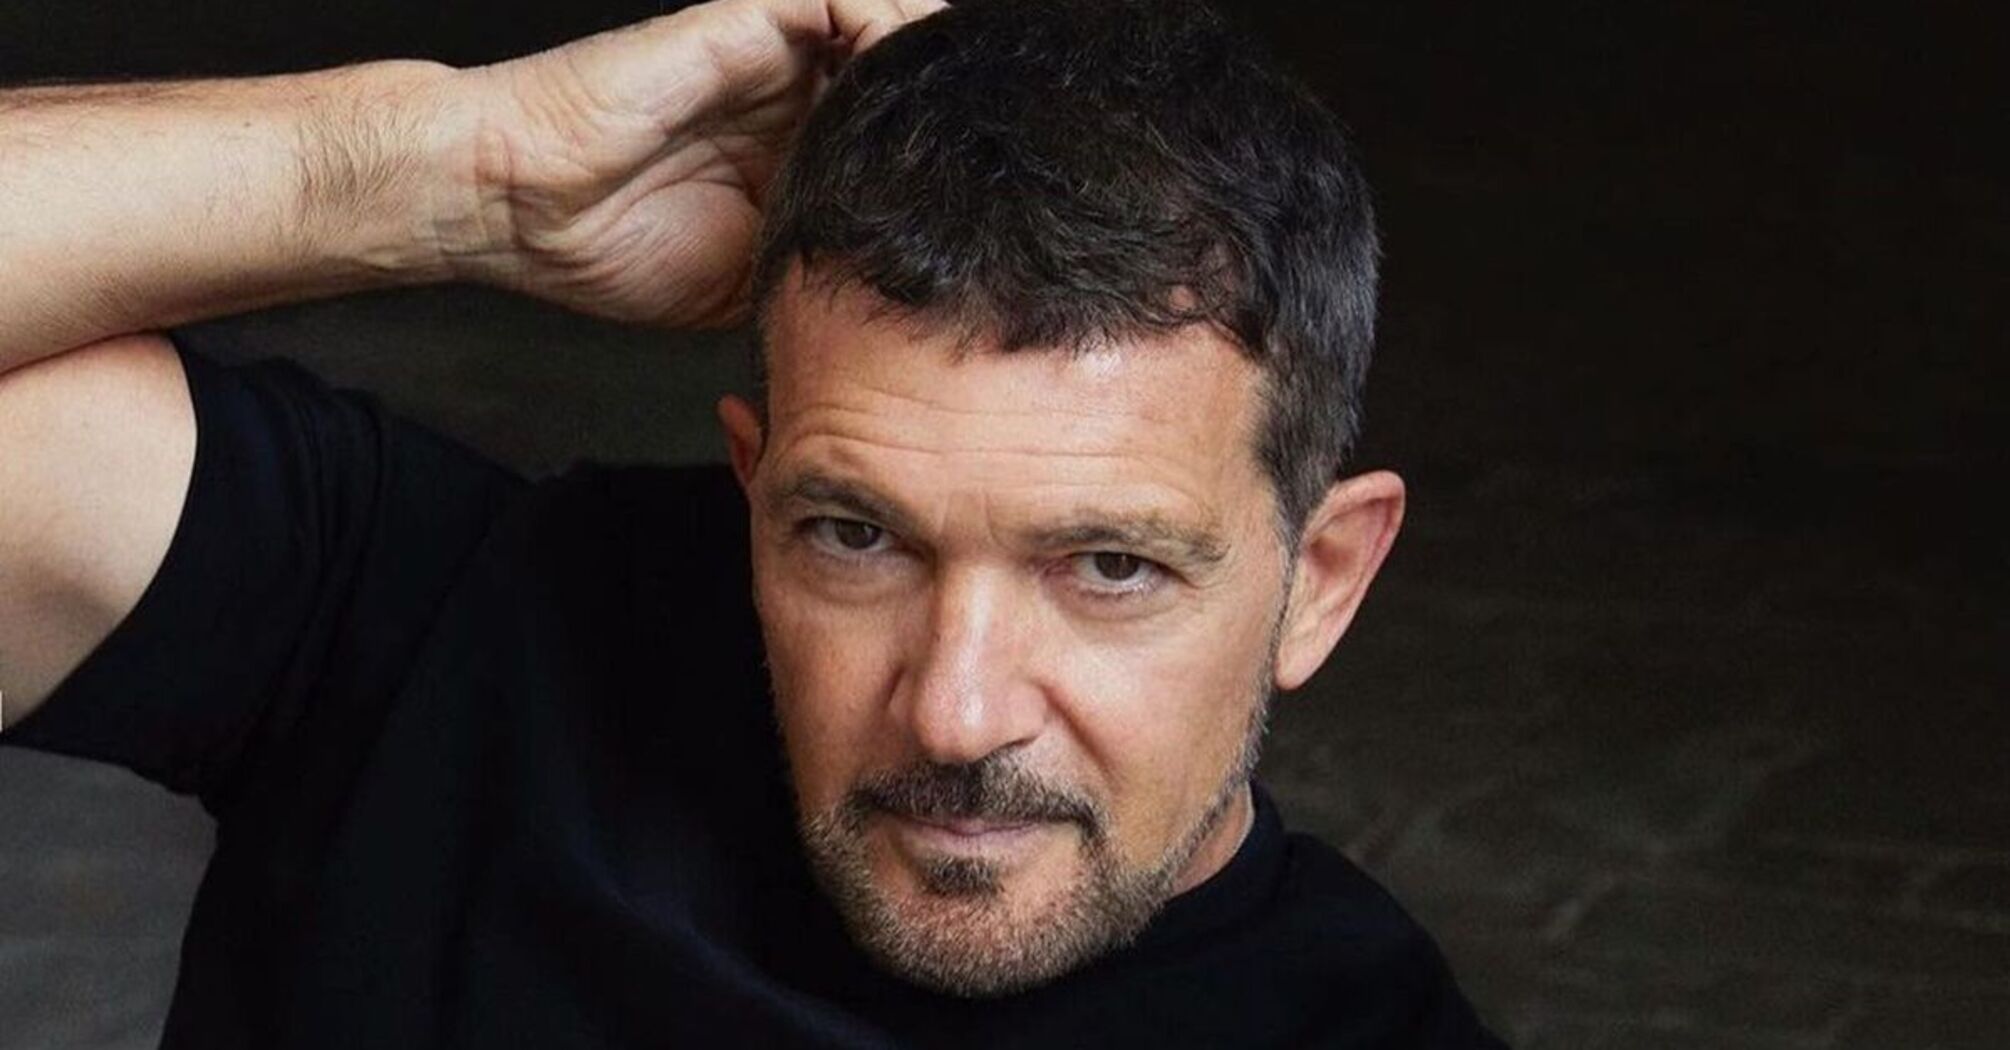 5 interesting facts about Antonio Banderas that you might not know